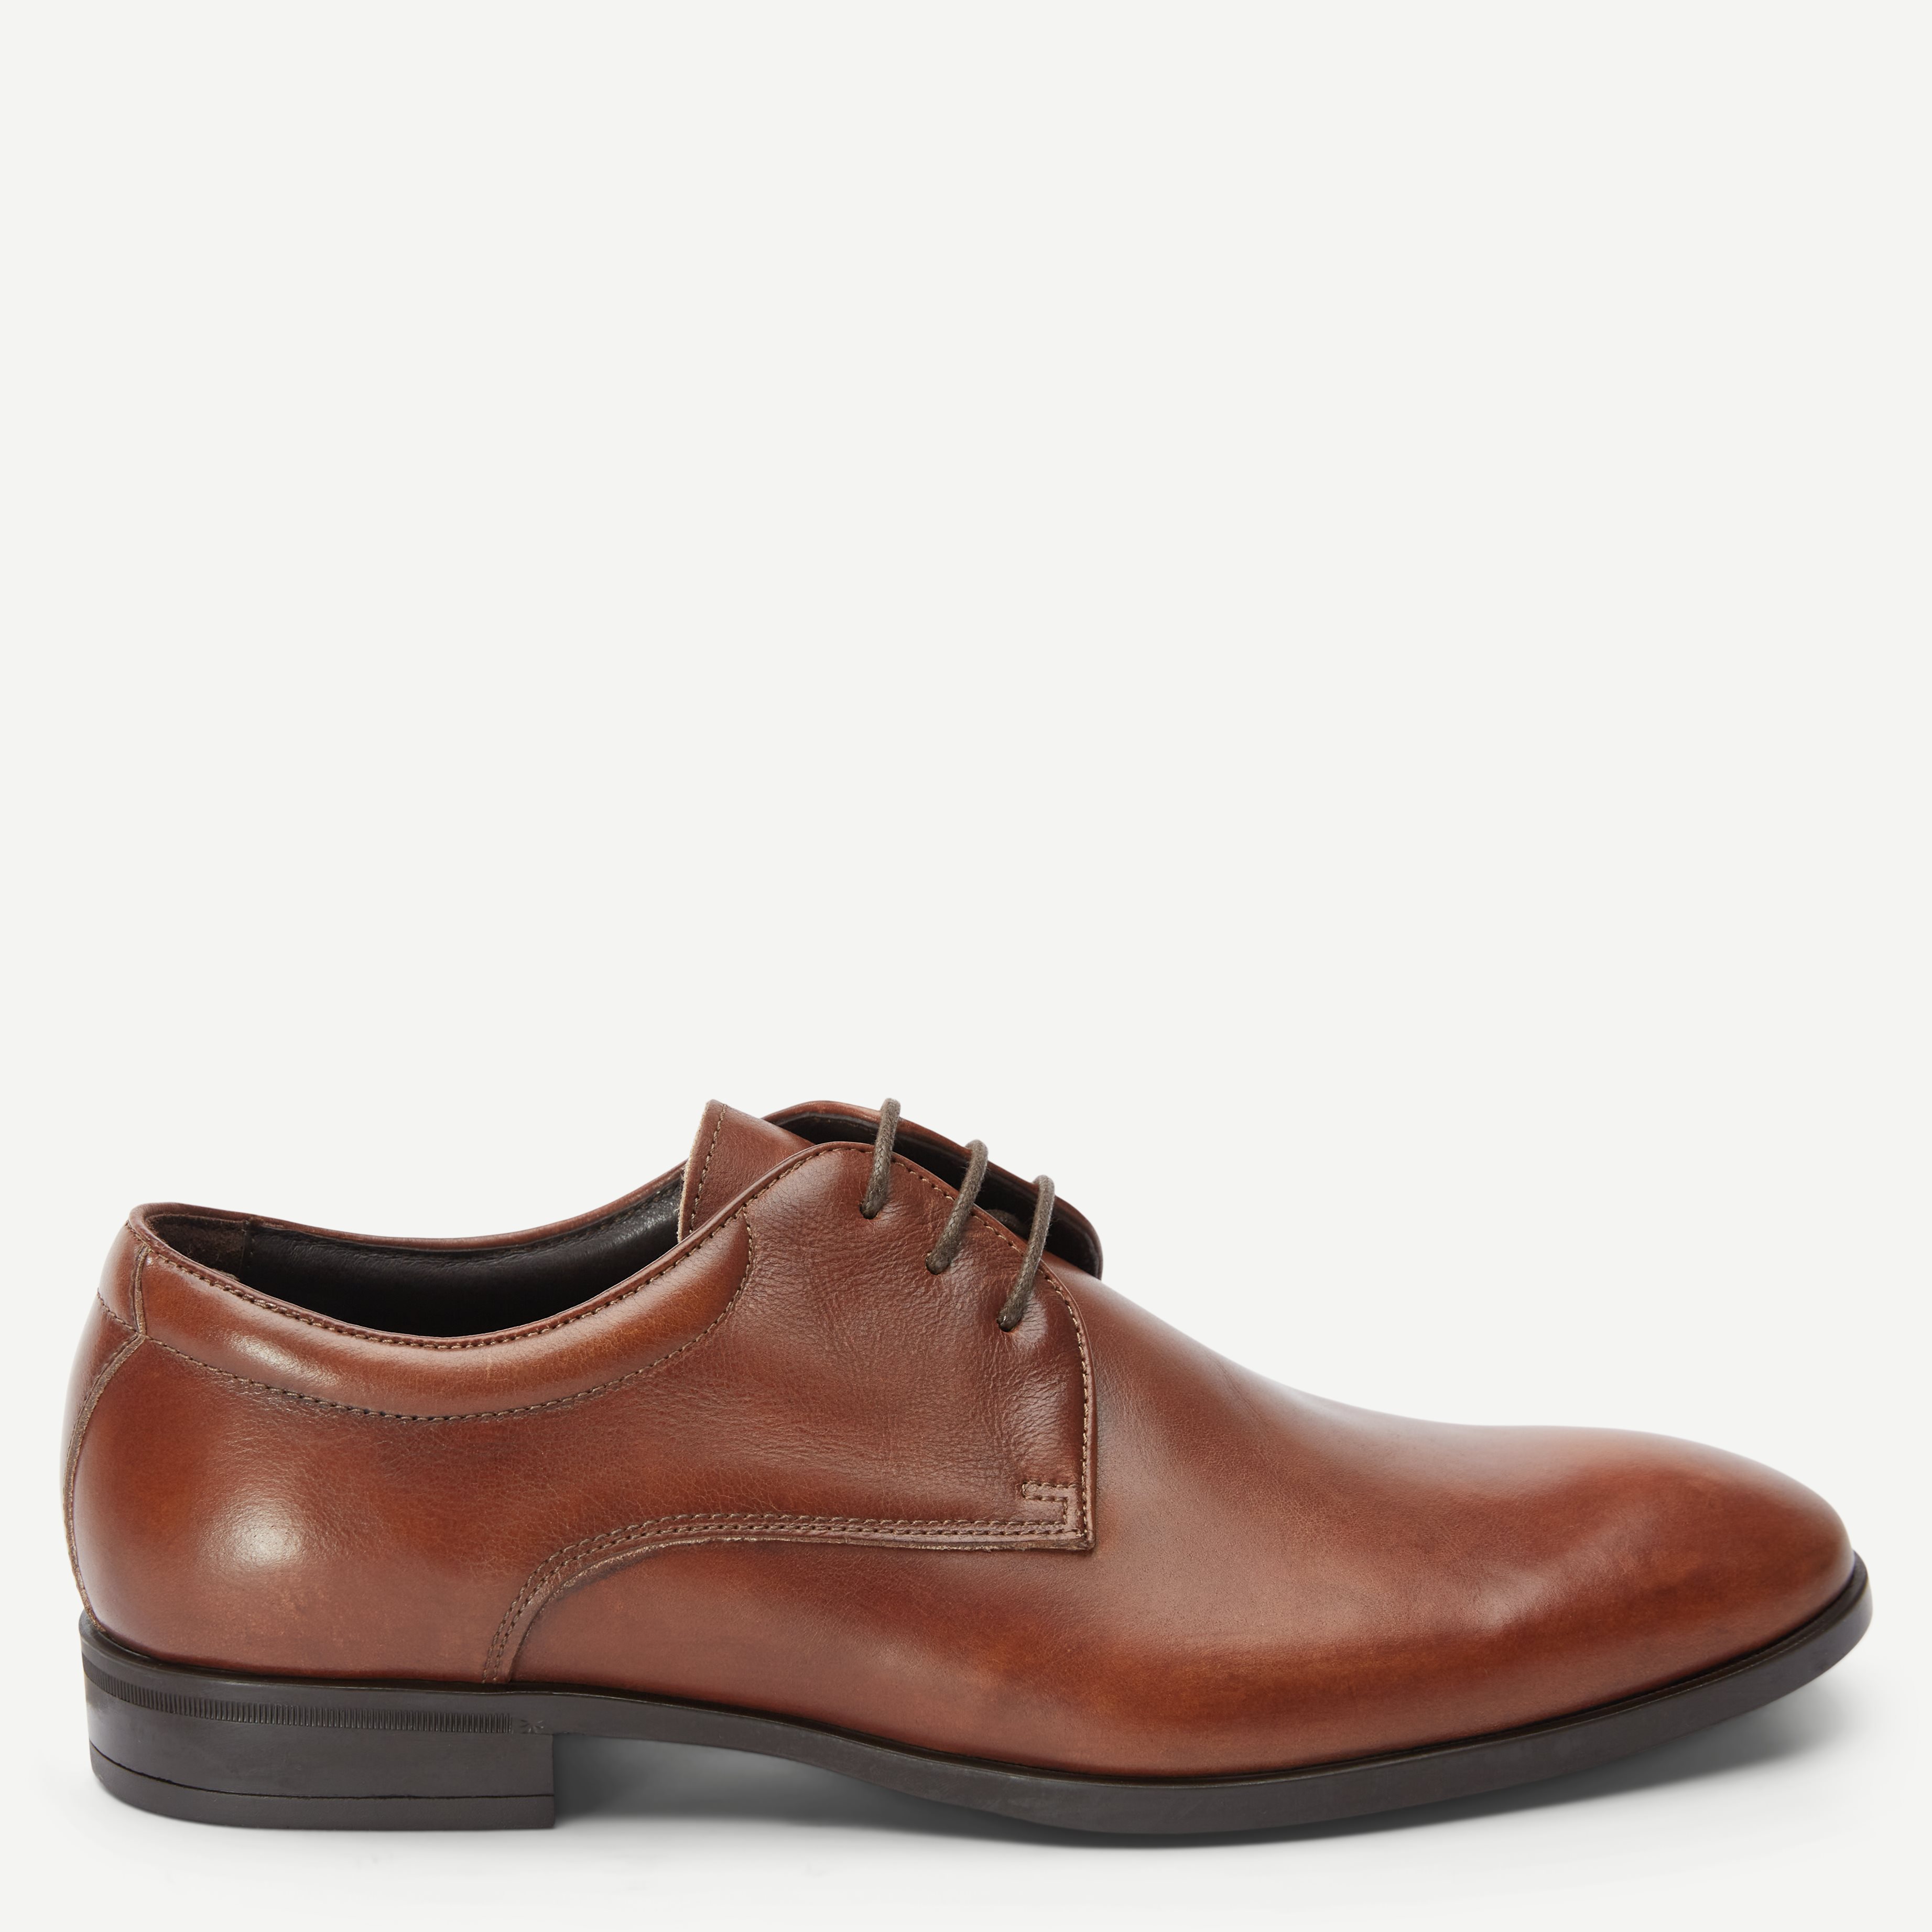 TGA 2361 Business Shoes - Shoes - Brown